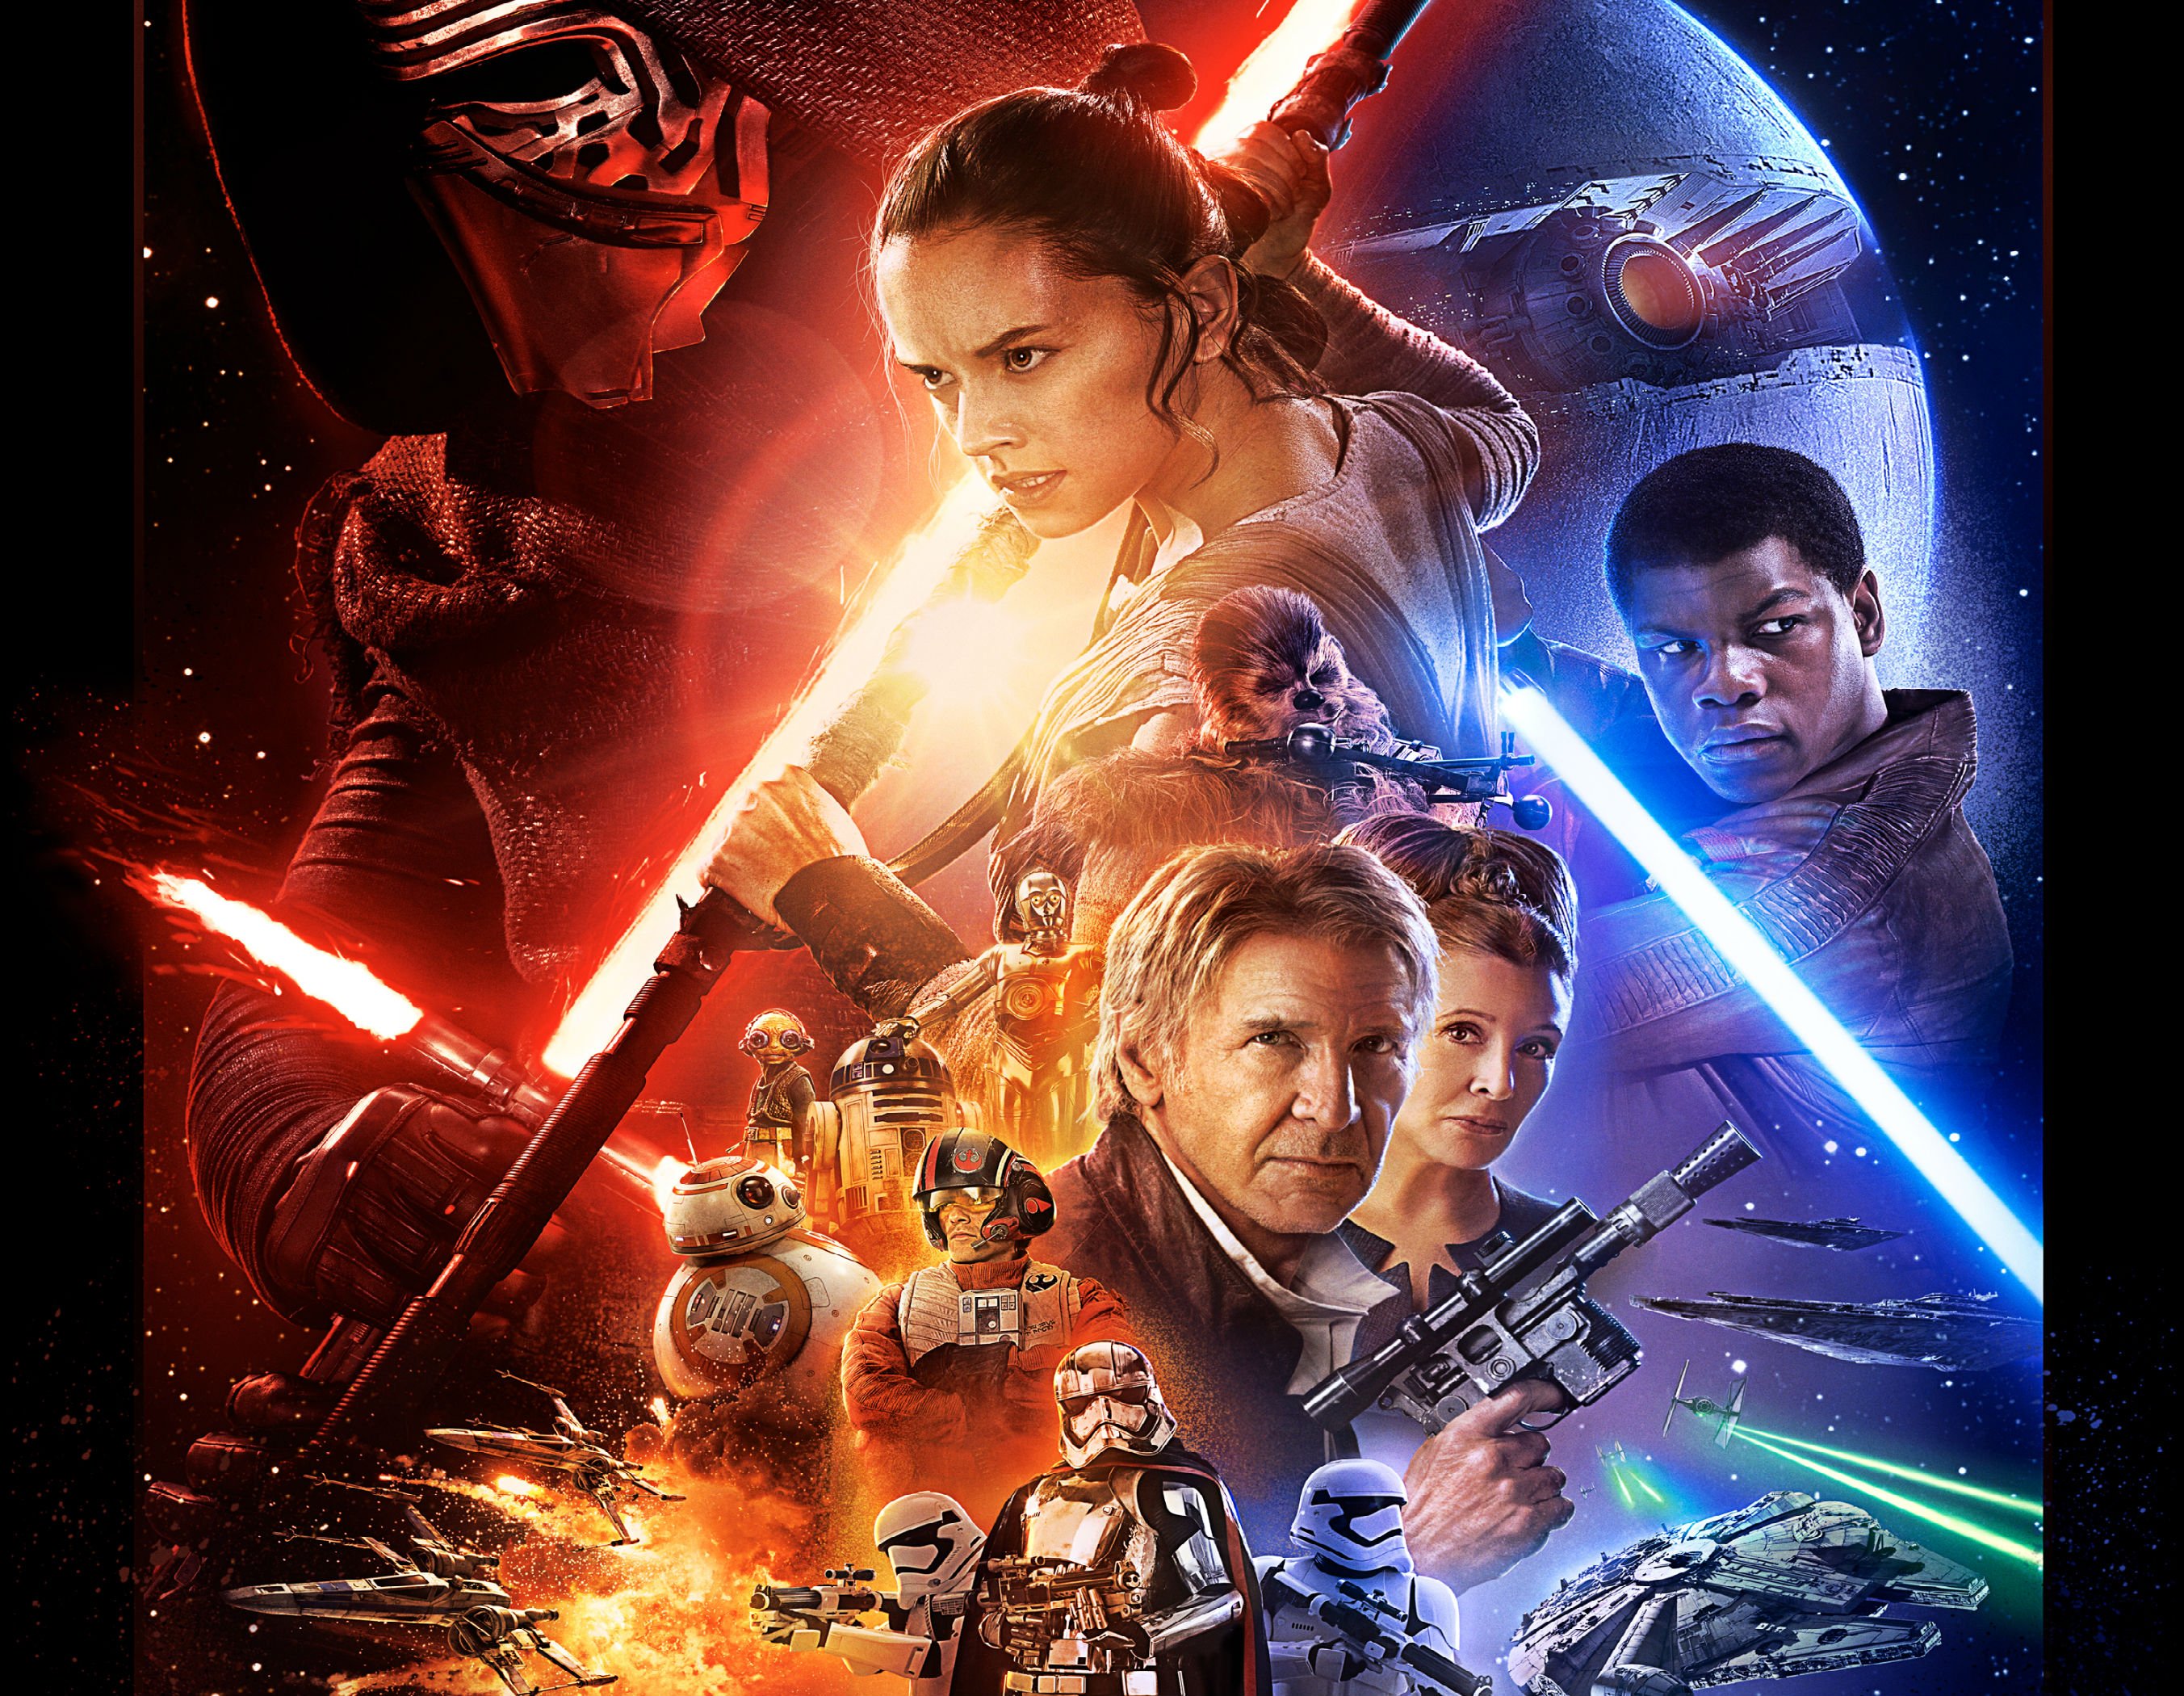 star wars the force awakens full movie for free